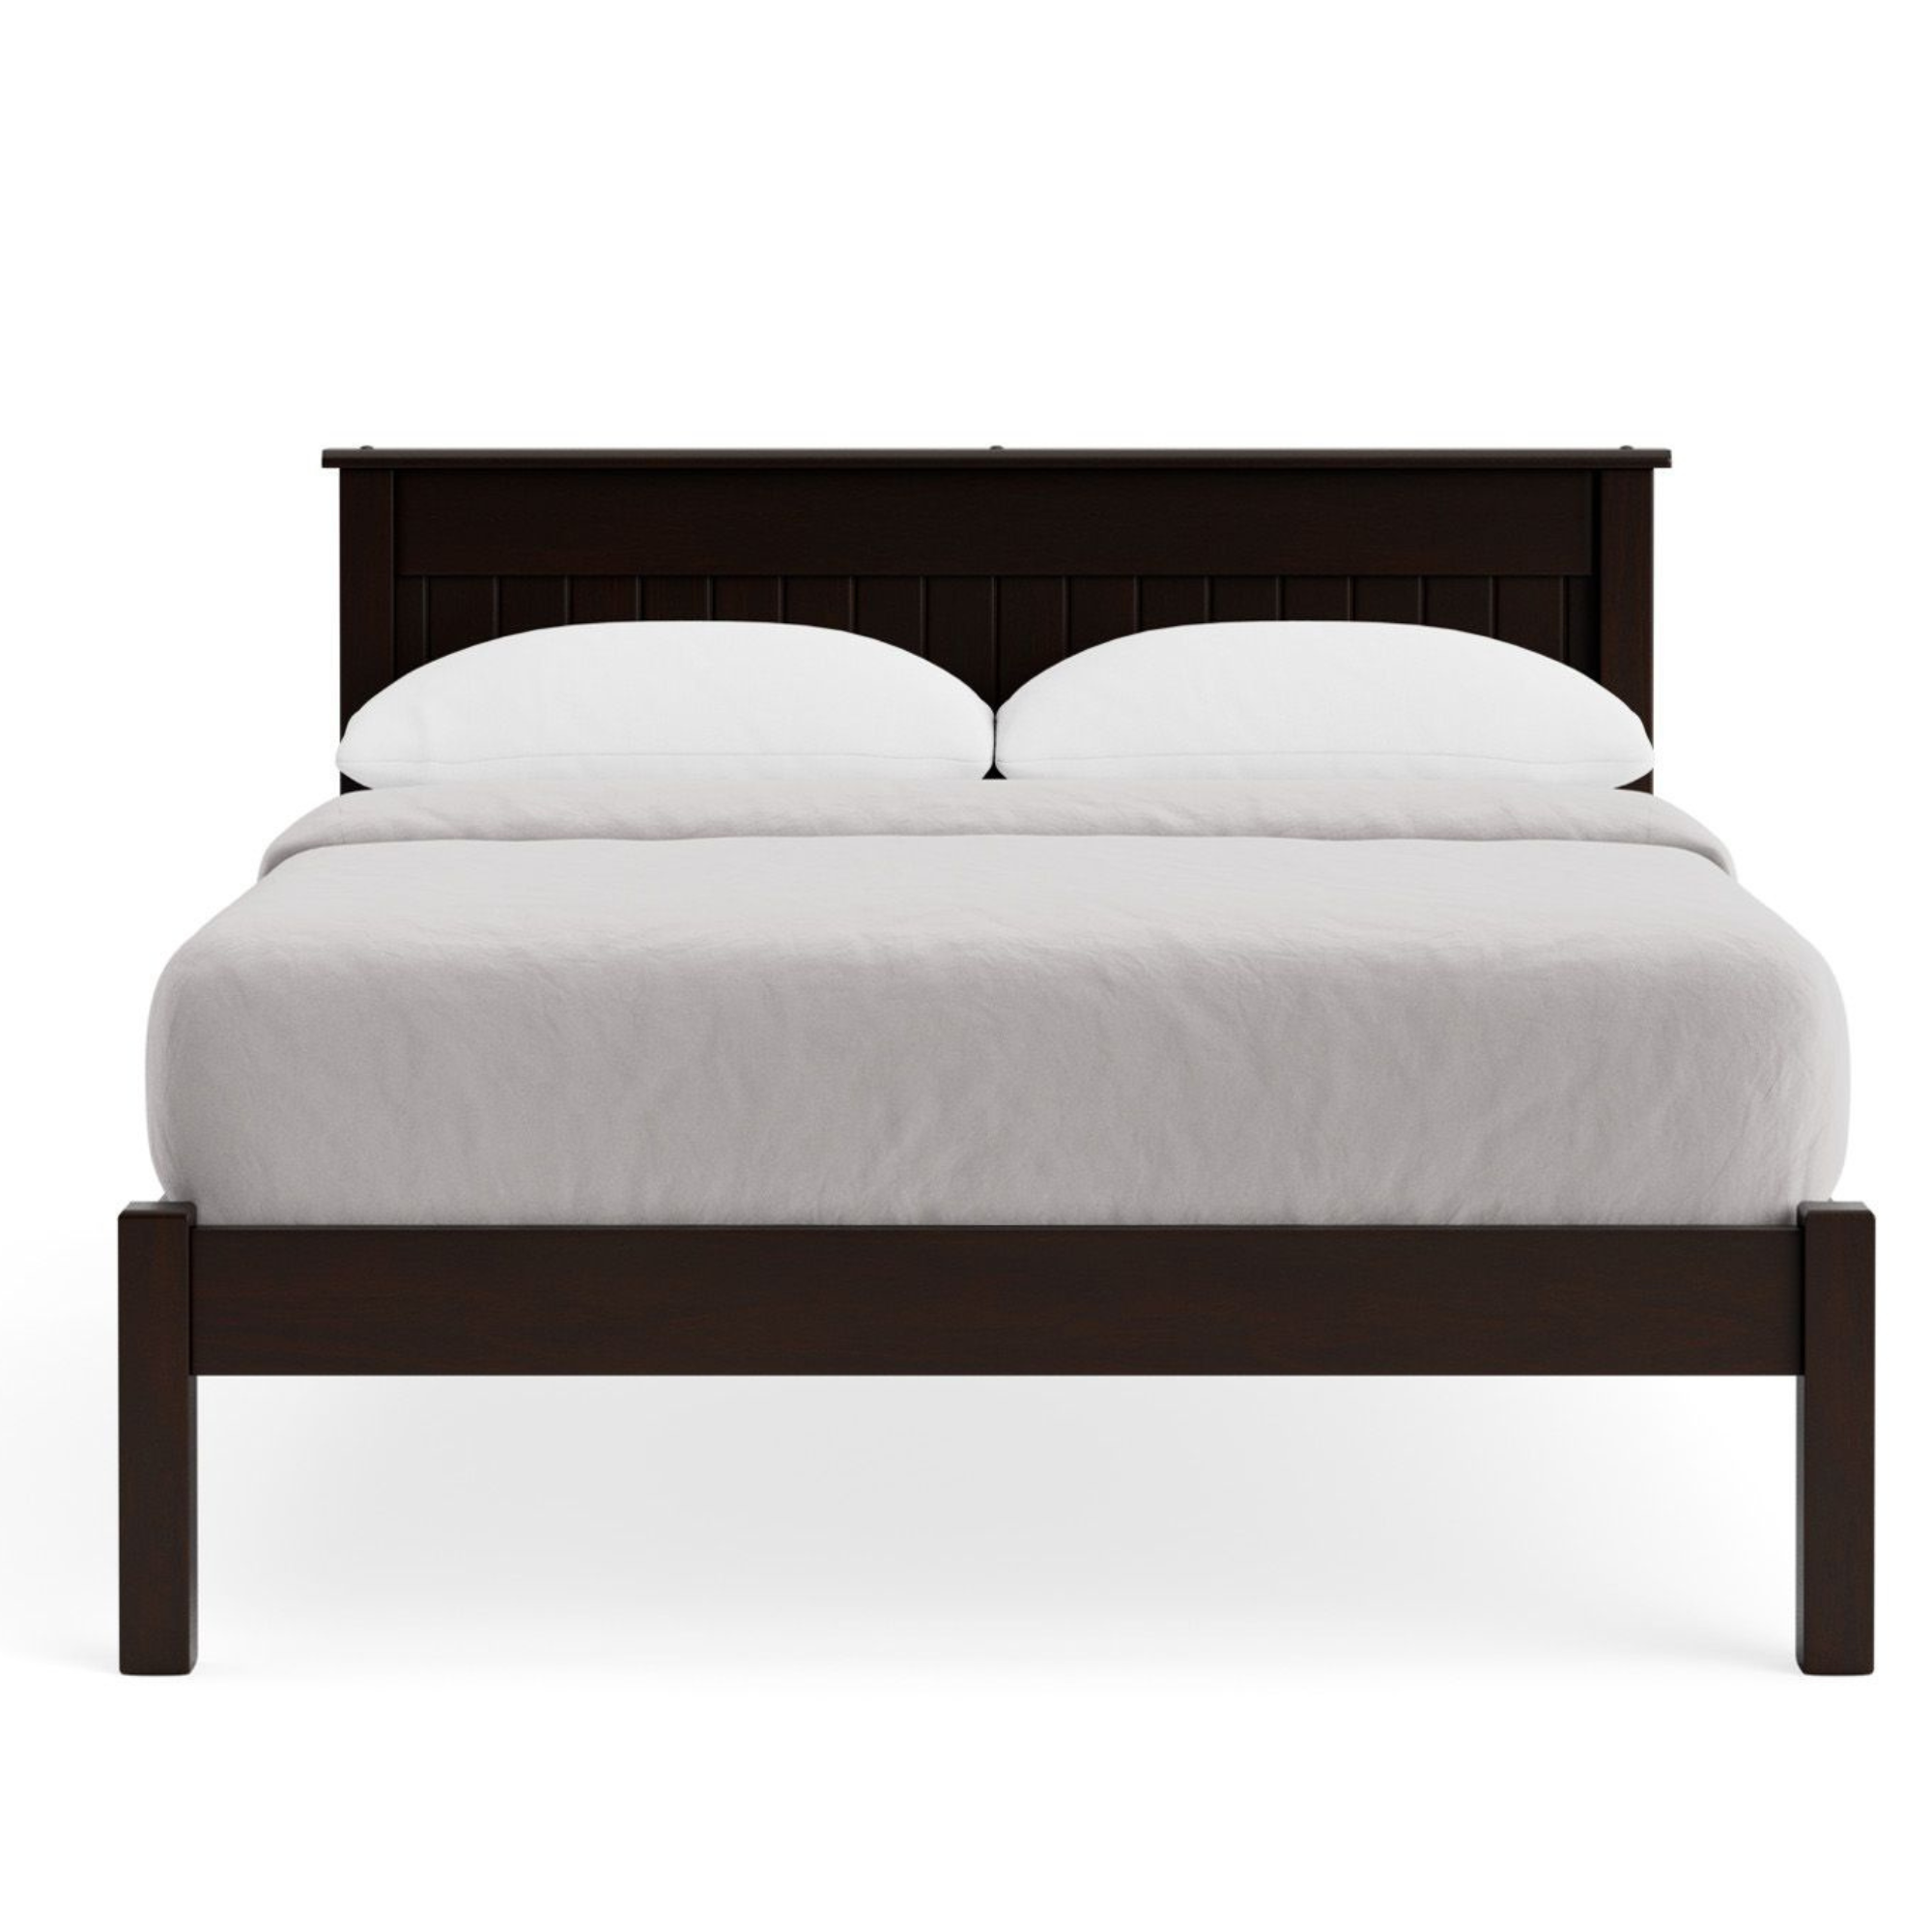 ANDORRA SLAT BED | LOW FOOT END | ALL SIZES | NZ MADE BEDROOM FURNITURE